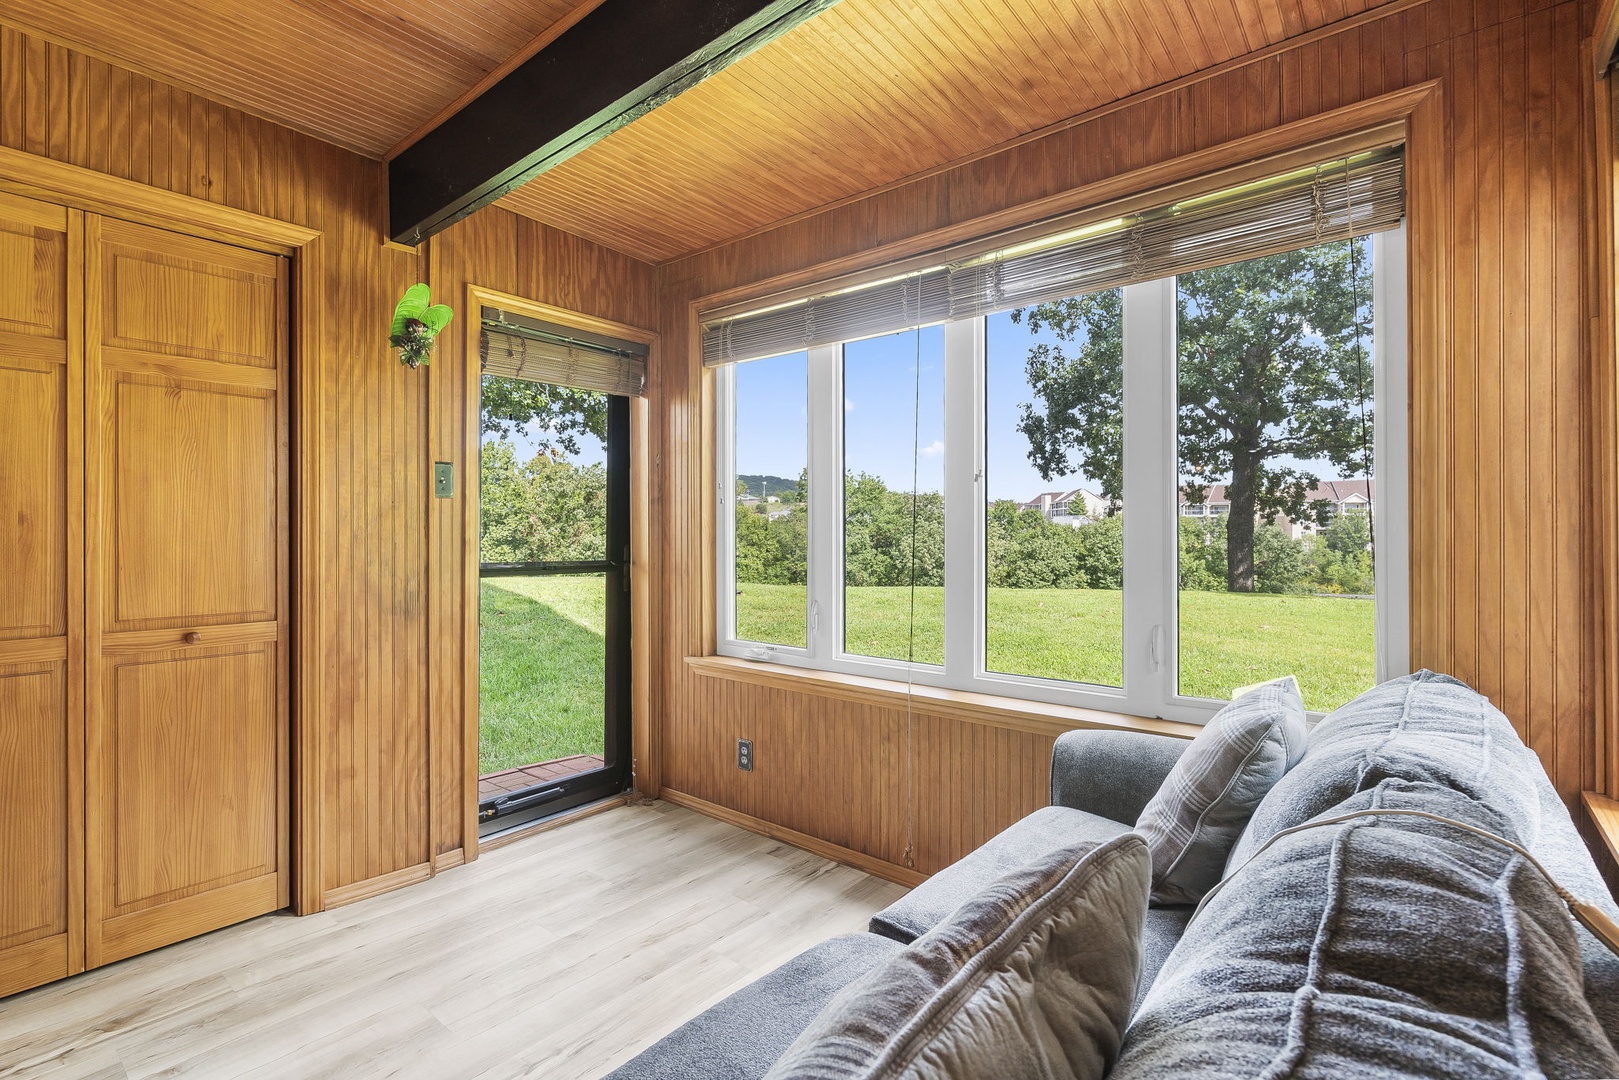 Head into the sunroom & relax with tranquil nature views on the queen sleeper sofa